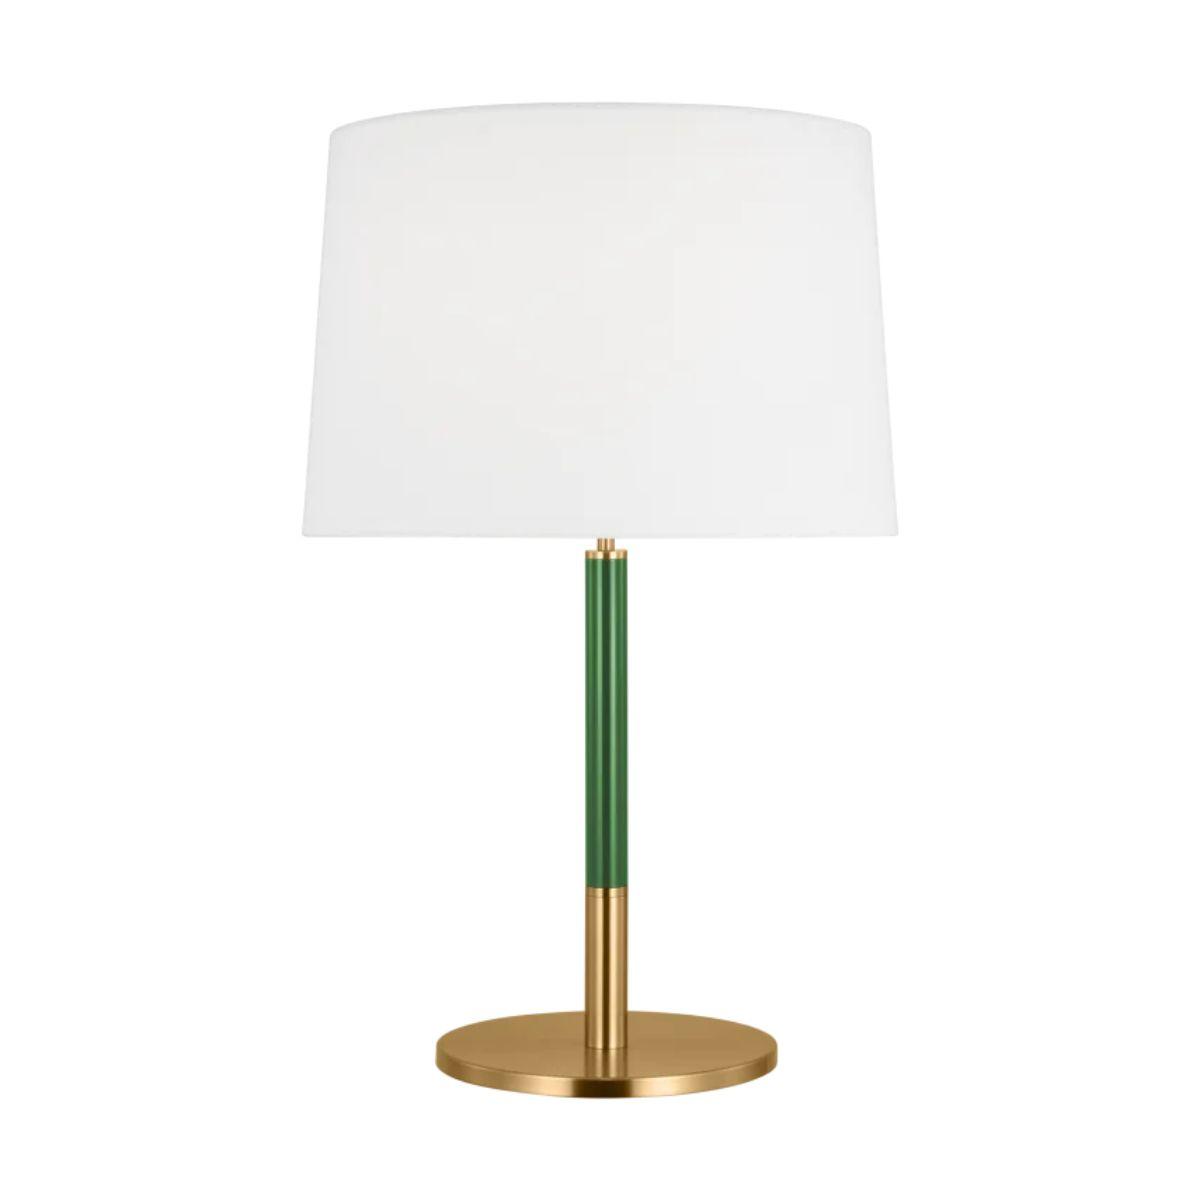 Monroe Medium Table Lamp Burnished Brass with Green Accents - Bees Lighting